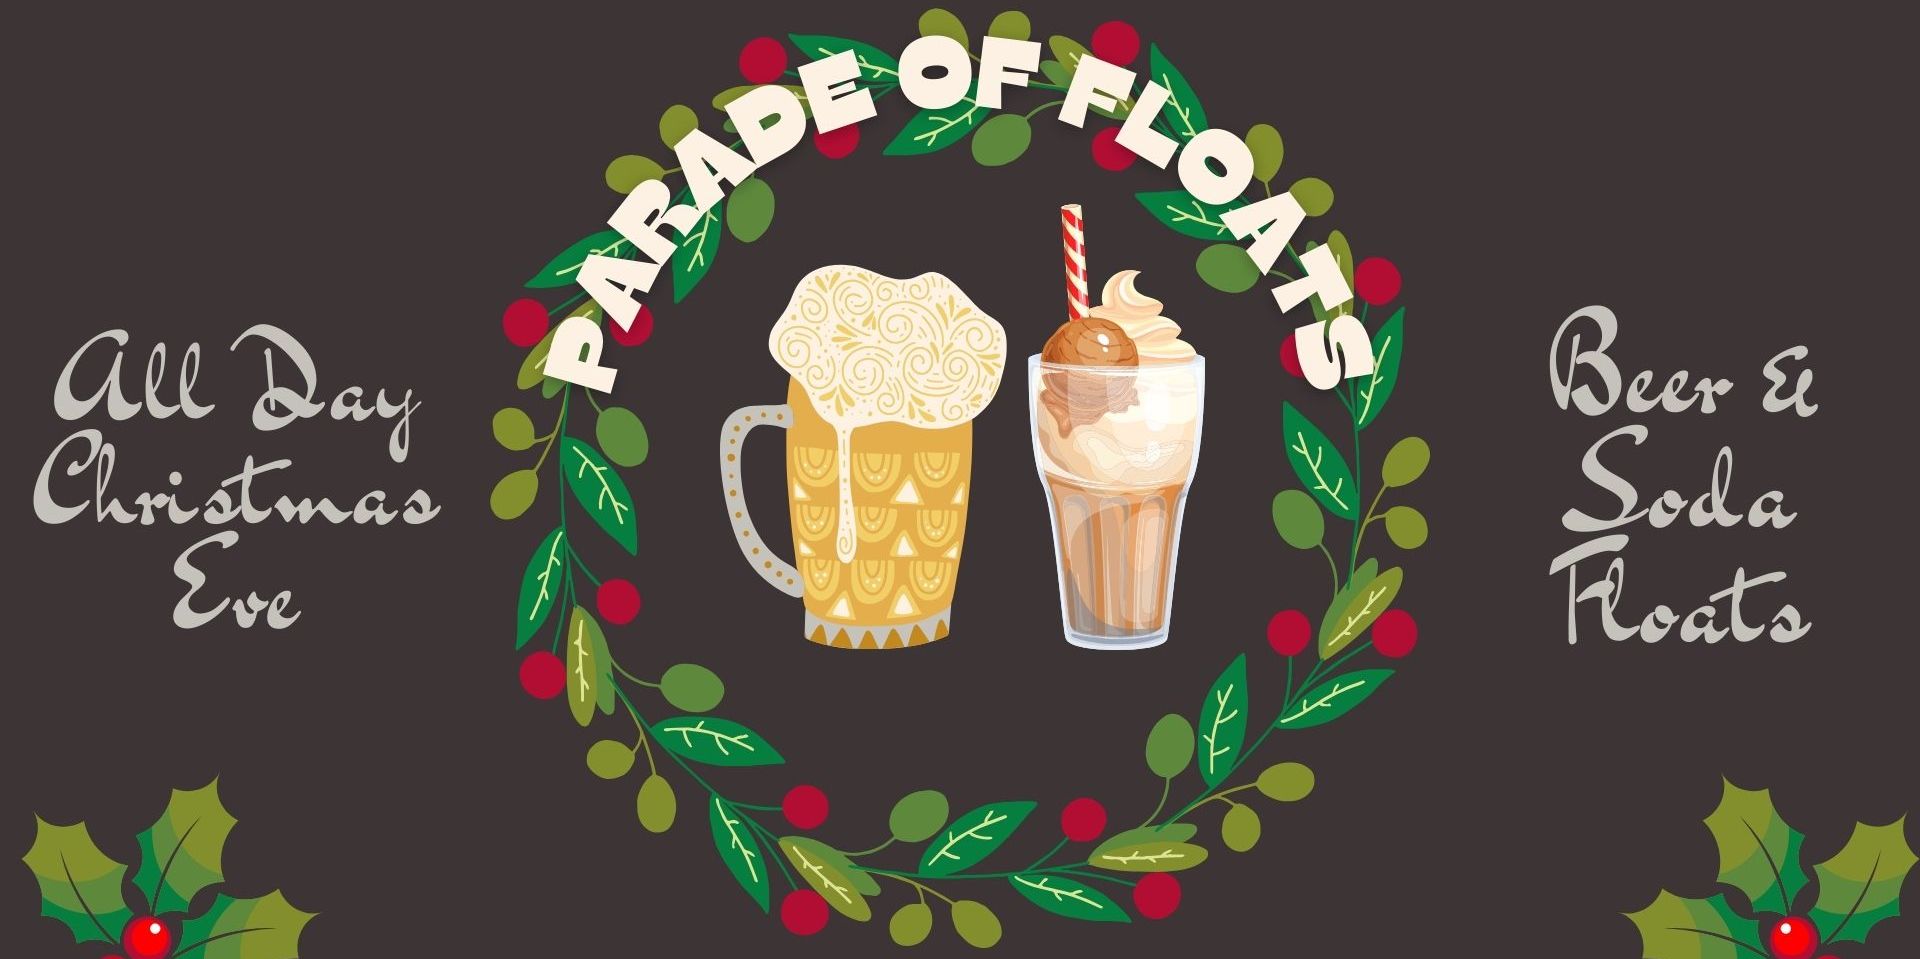 Christmas Eve "Parade of Floats" promotional image